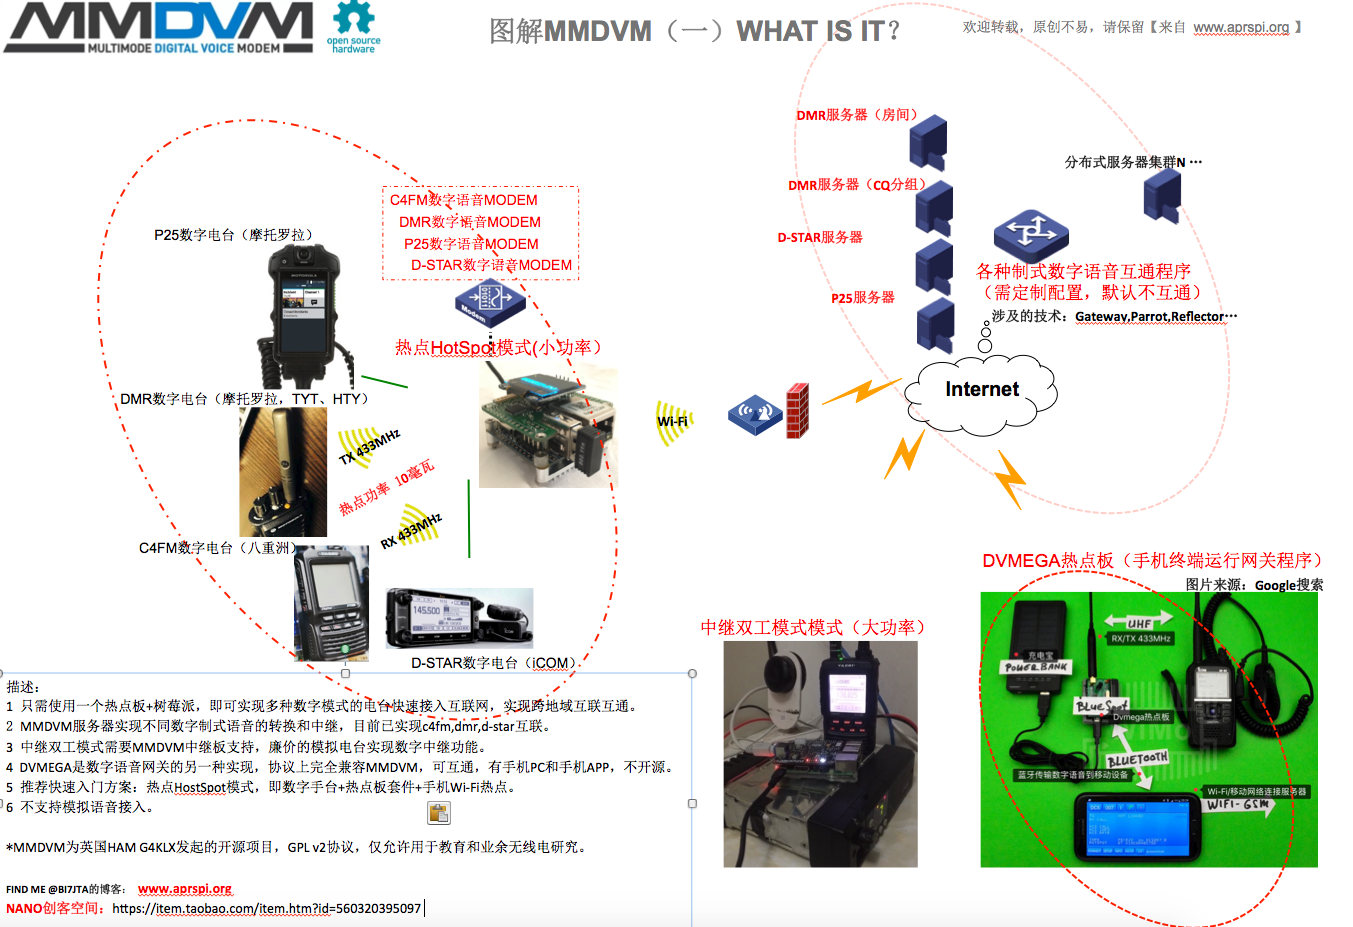 What-is-mmdvm (1).png